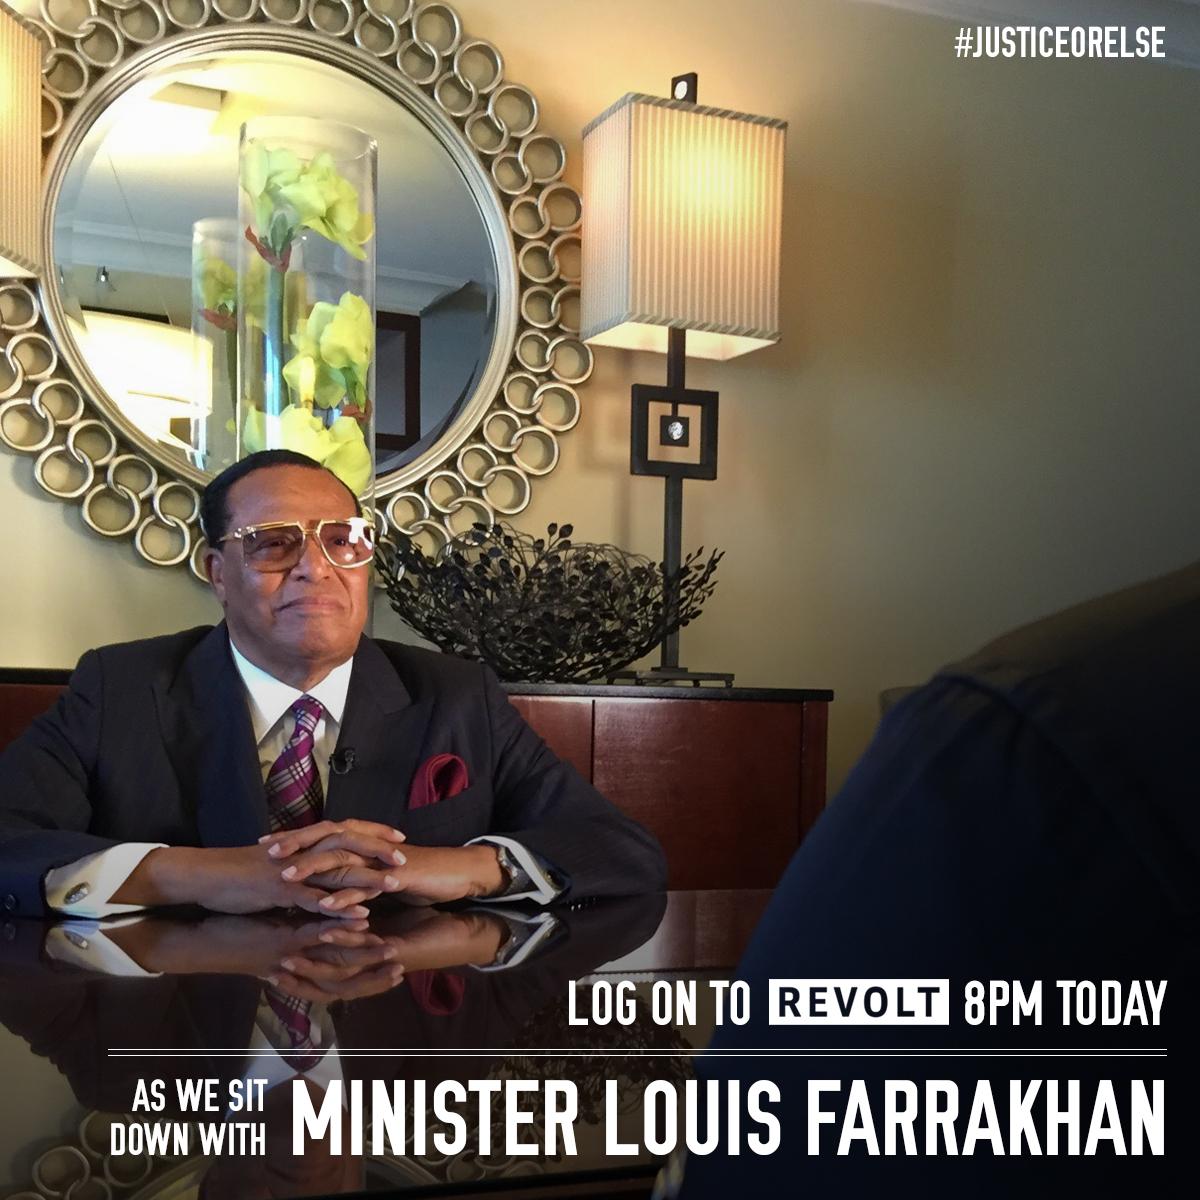 RT @LouisFarrakhan: Watch my interview with @RevoltTV. I am honored to be on @iamdiddy's network: http://t.co/zLcTPf77OH #JusticeOrElse htt…